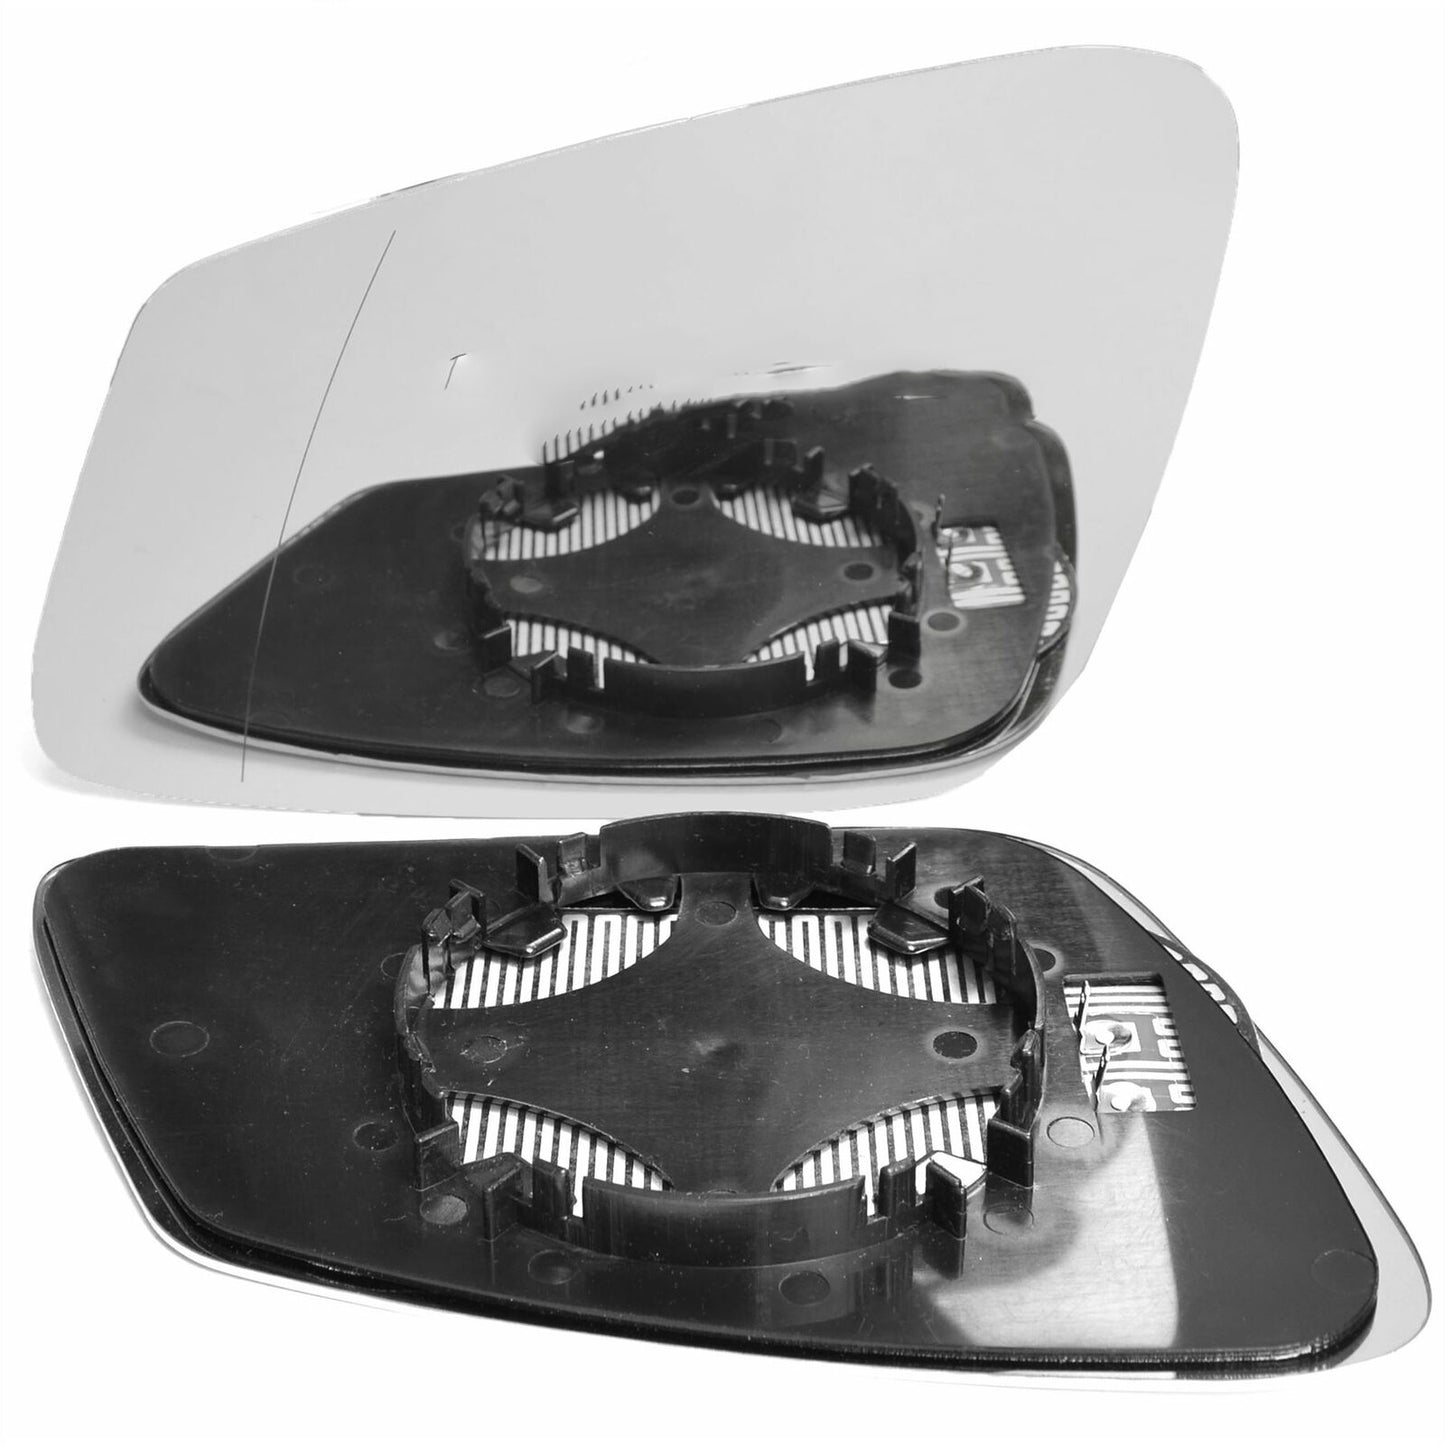 Left side mirror glass for BMW 6 Series, Gran Coupe 2011-2018 wide angle heated